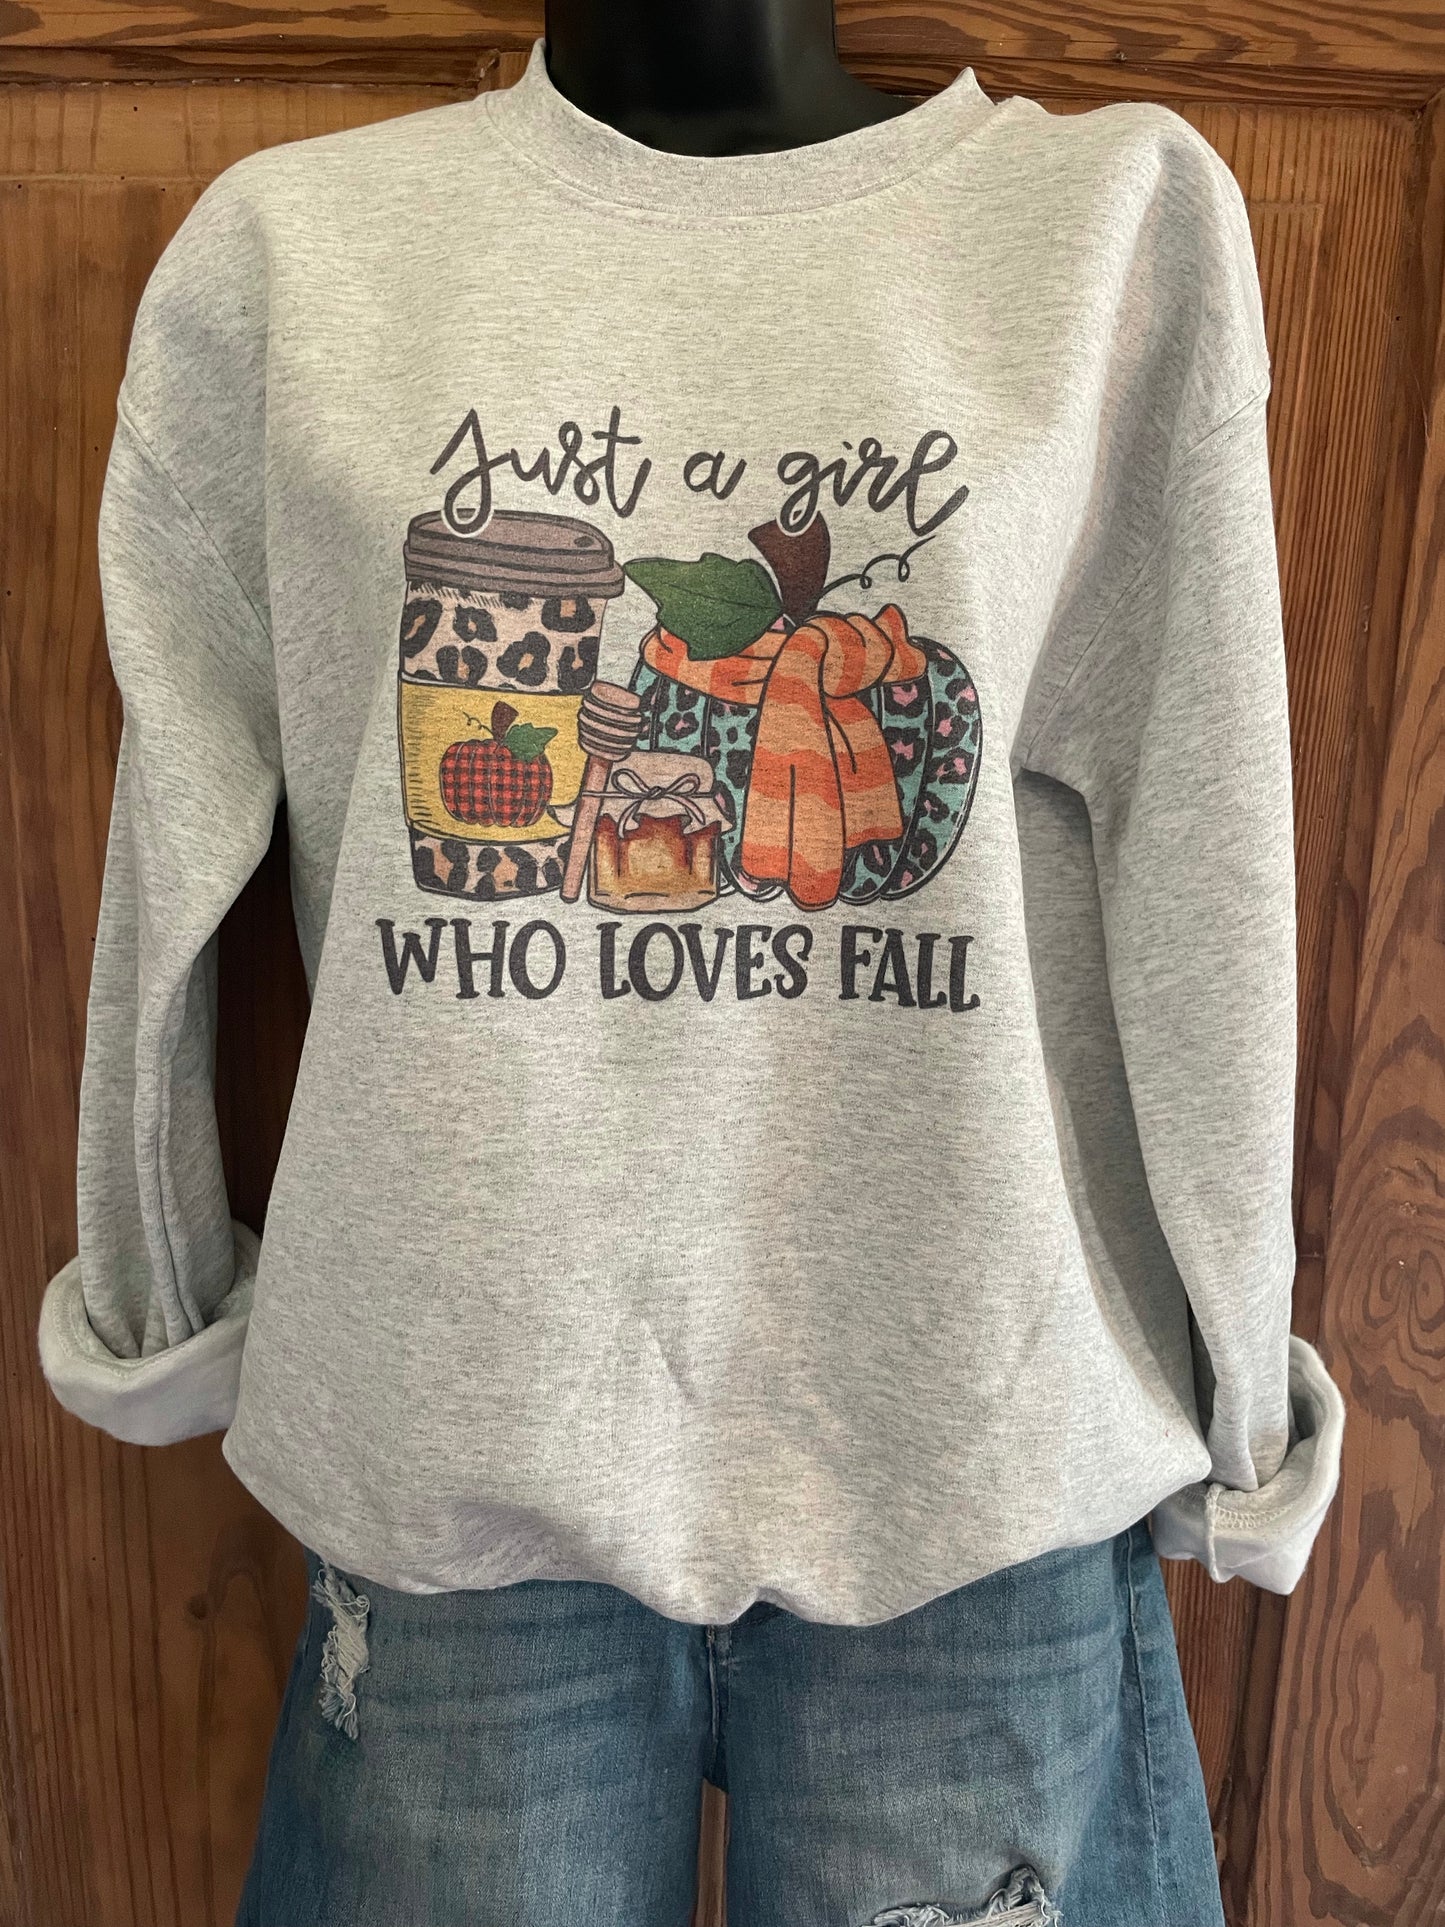 Just a girl who loves fall